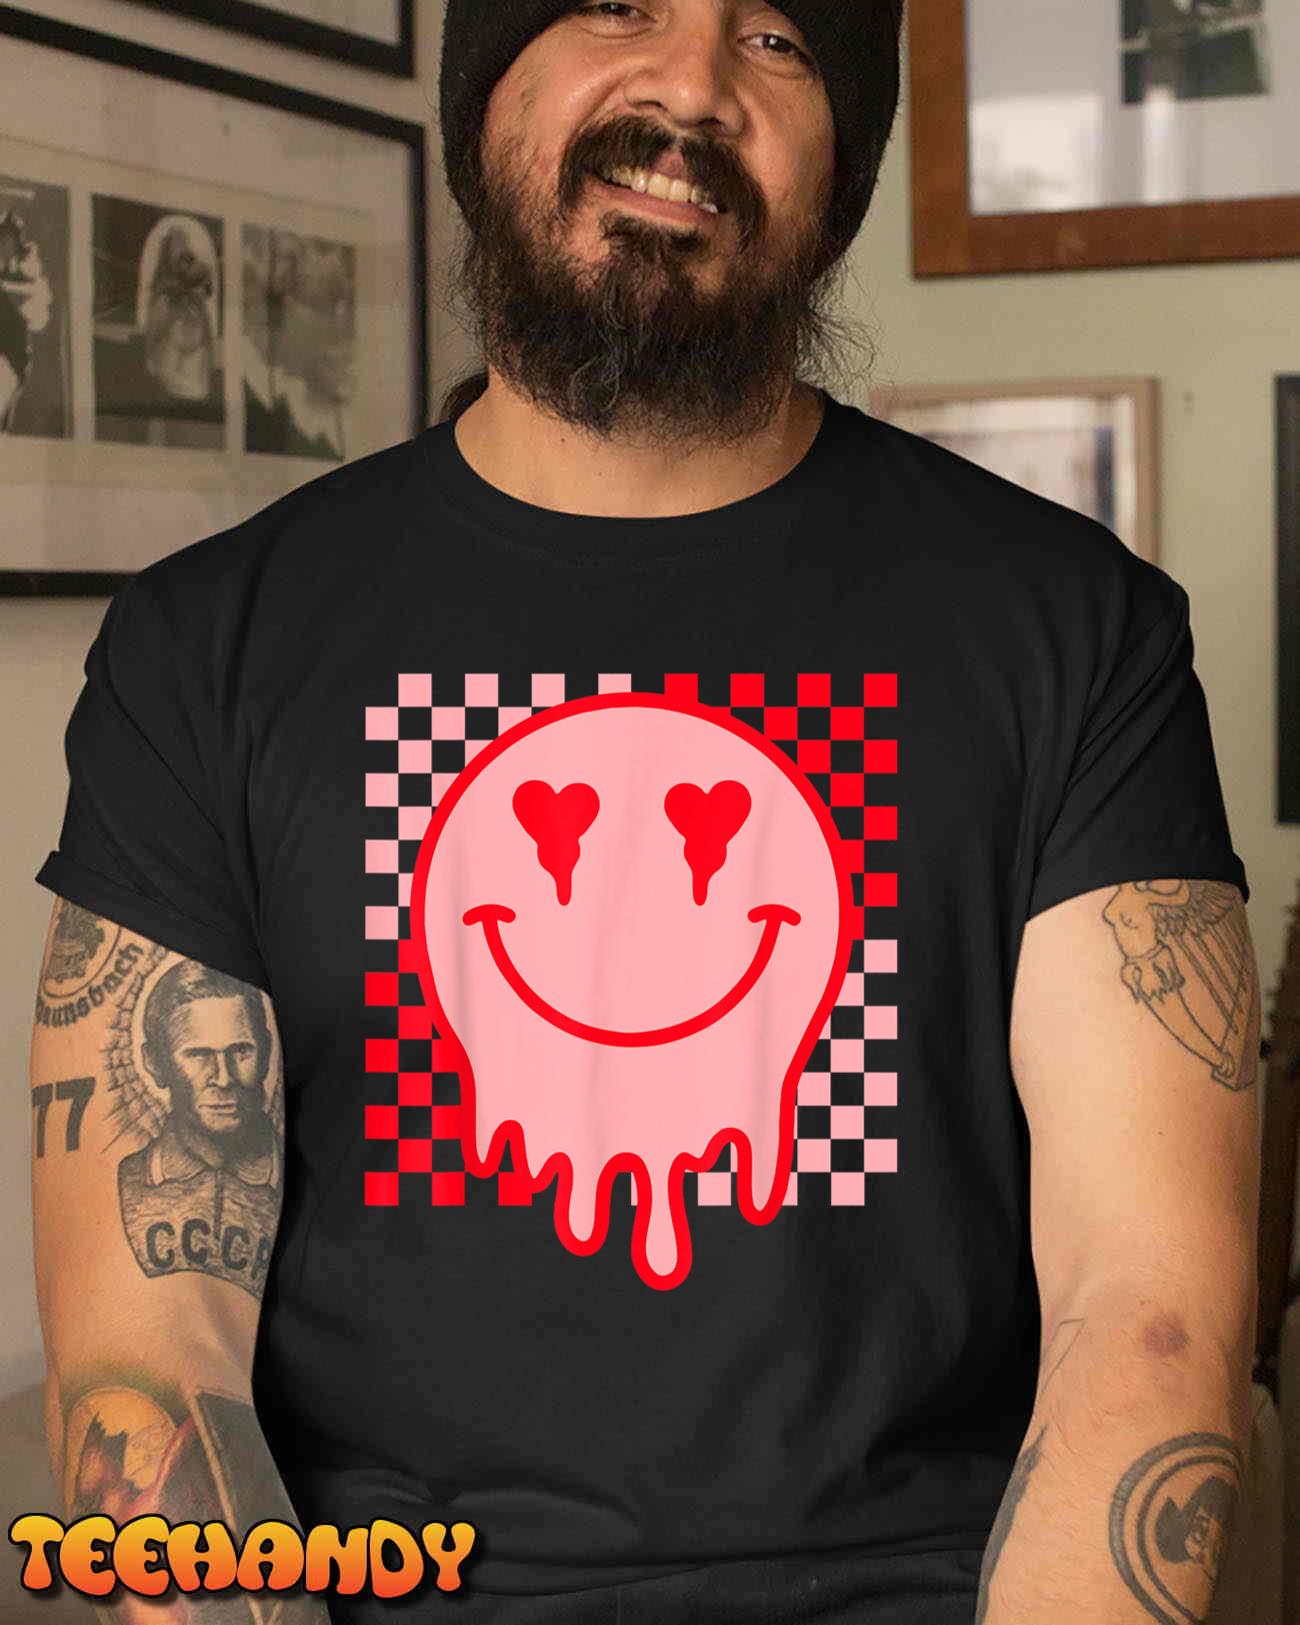 Retro Groovy Checkered Valentines Day Heart Eyes Happy Face T-Shirt